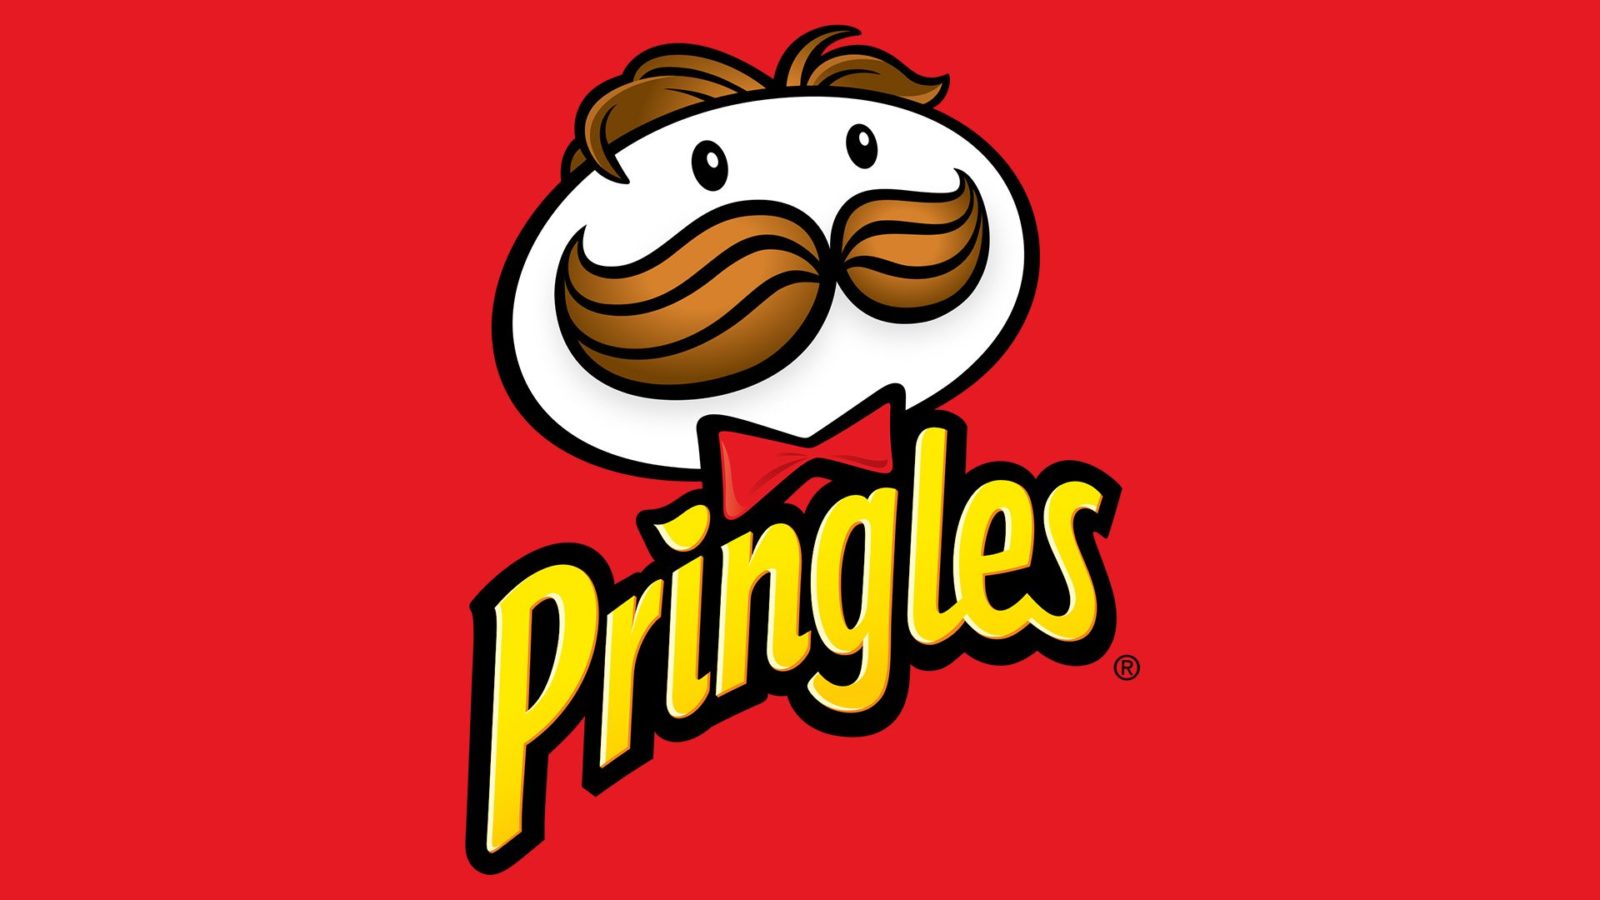 What does the Pringles logo mean?